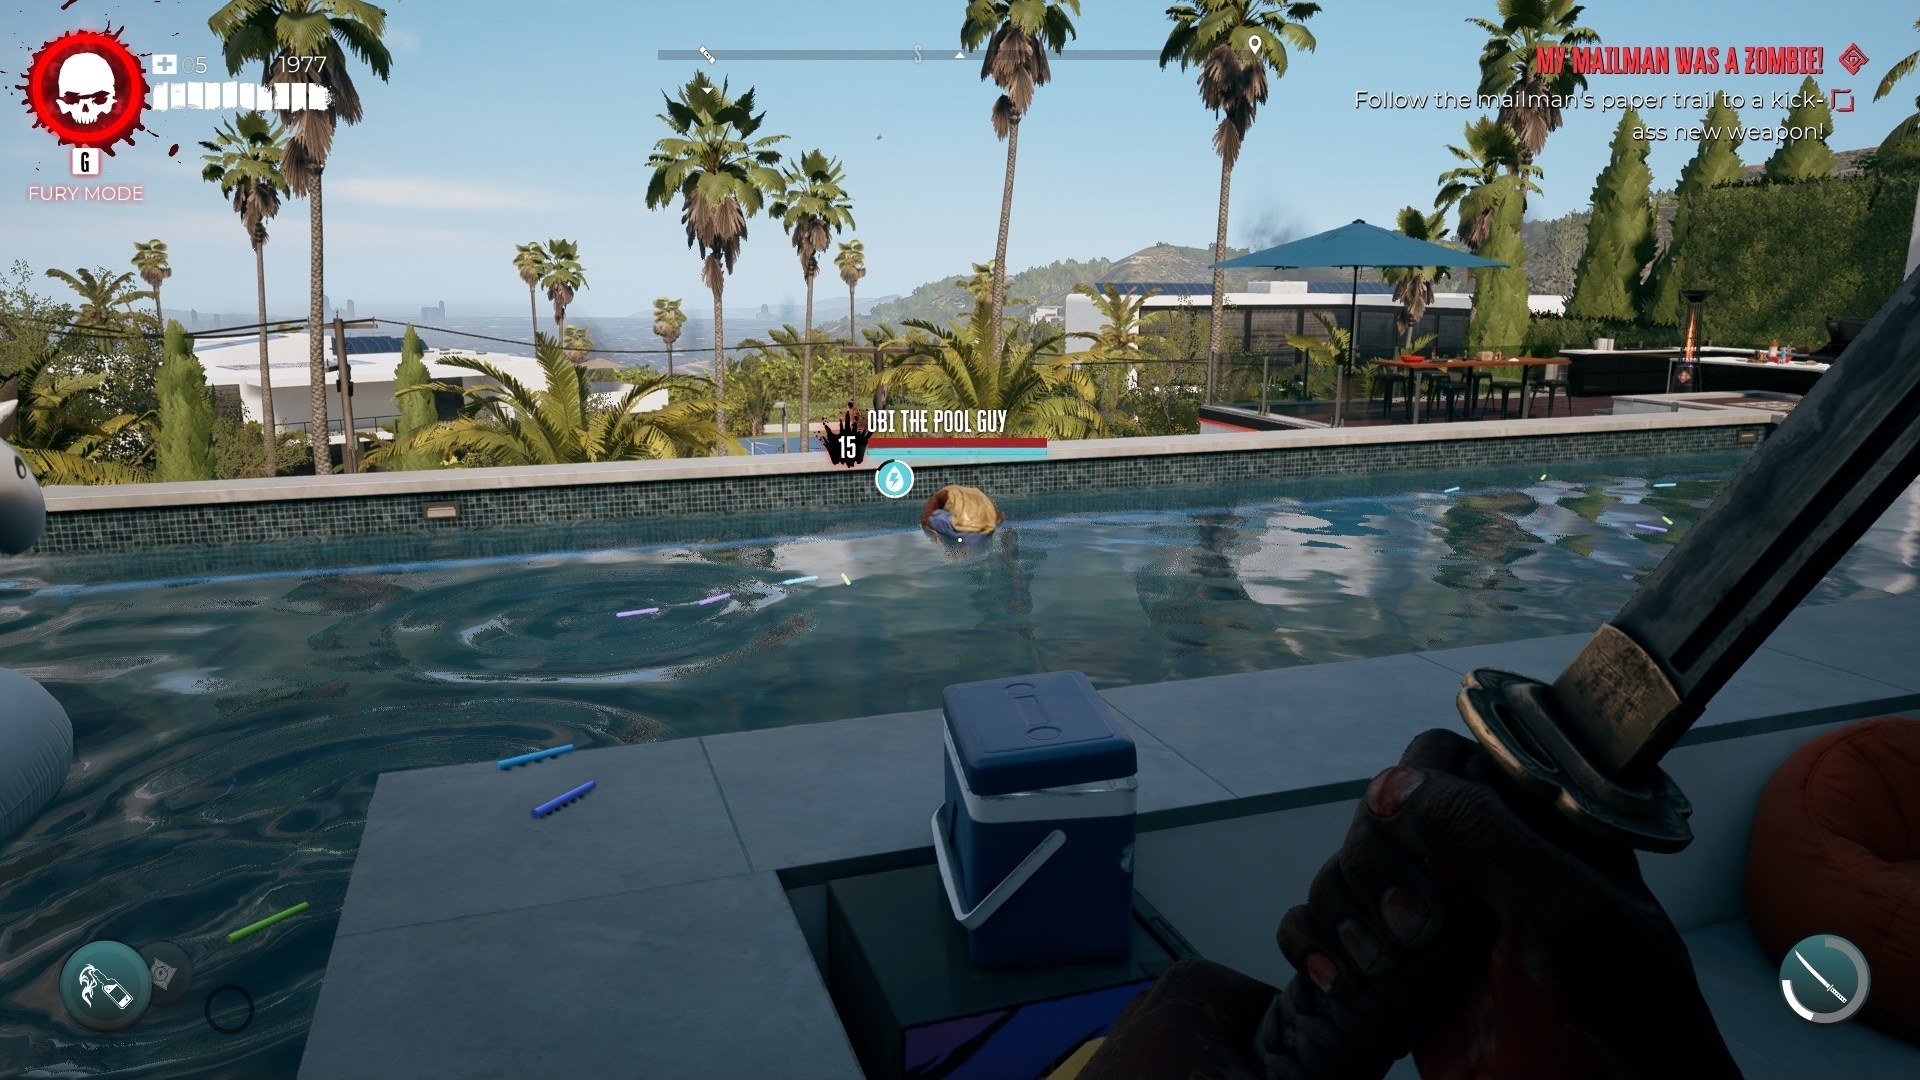 Dead Island 2 screenshot showing a zombie crouching down in a modern pool with palm trees in the background